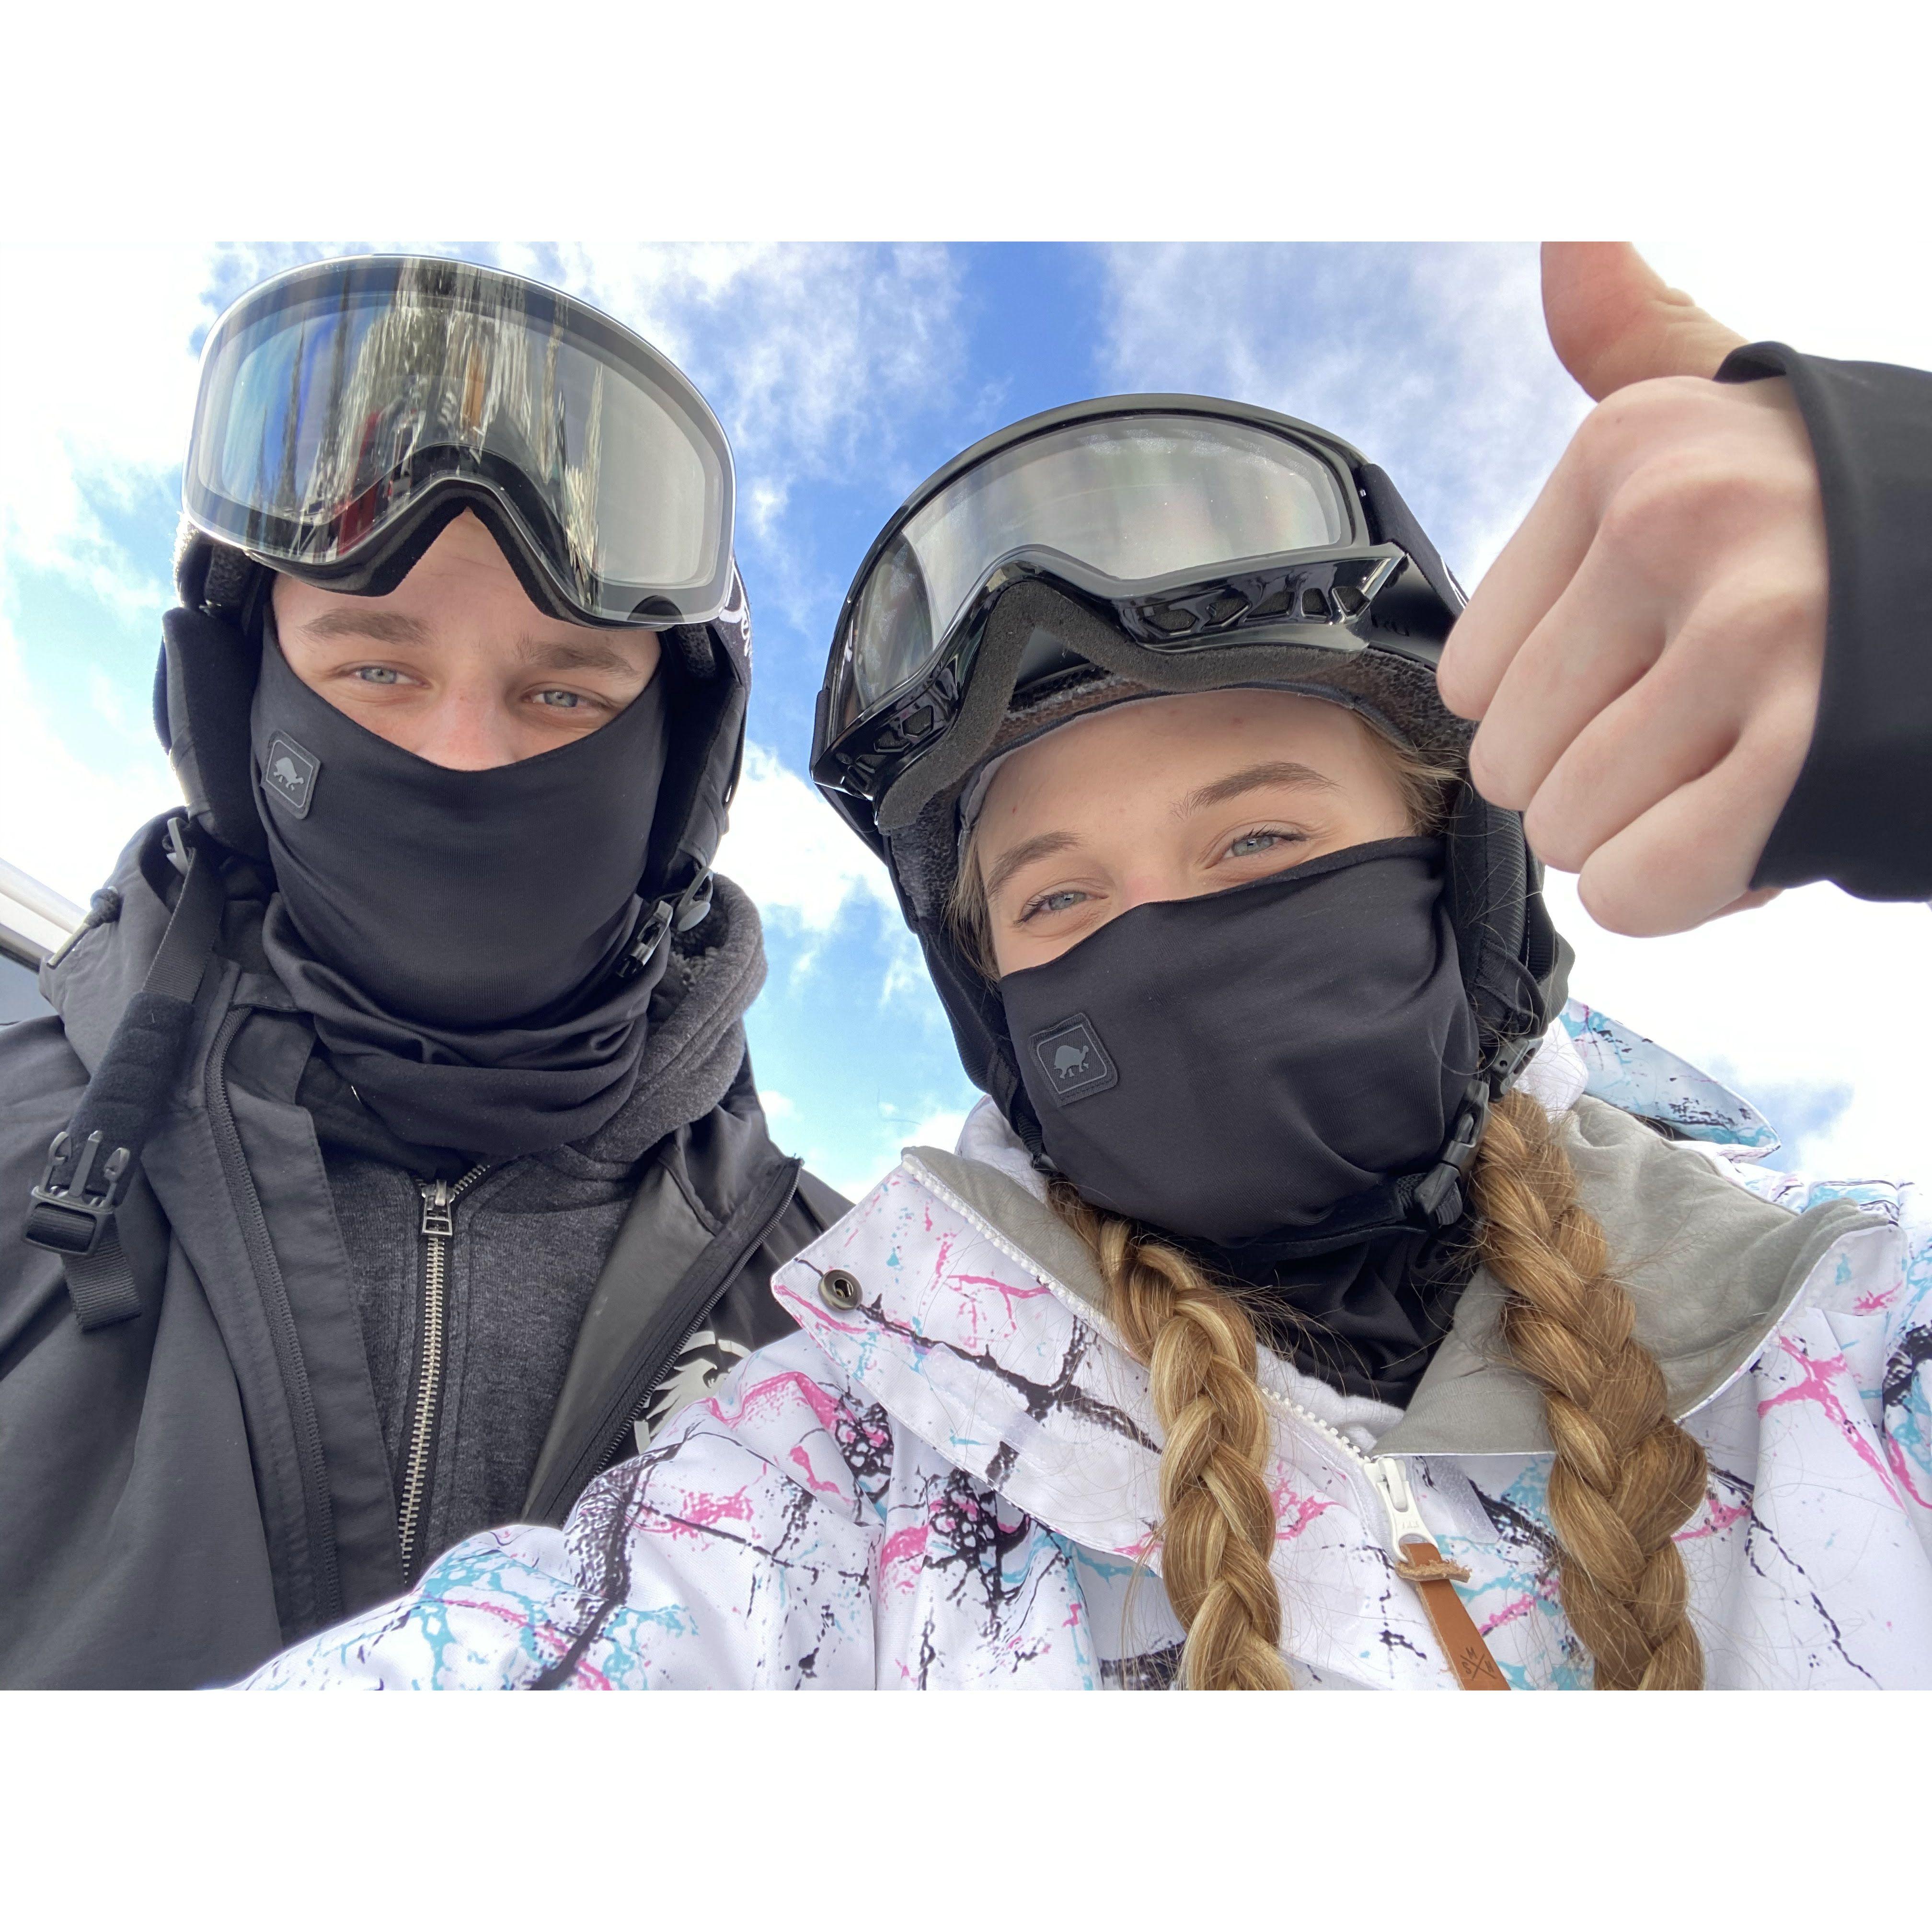 Taylor's first time snowboarding (She cried that day)